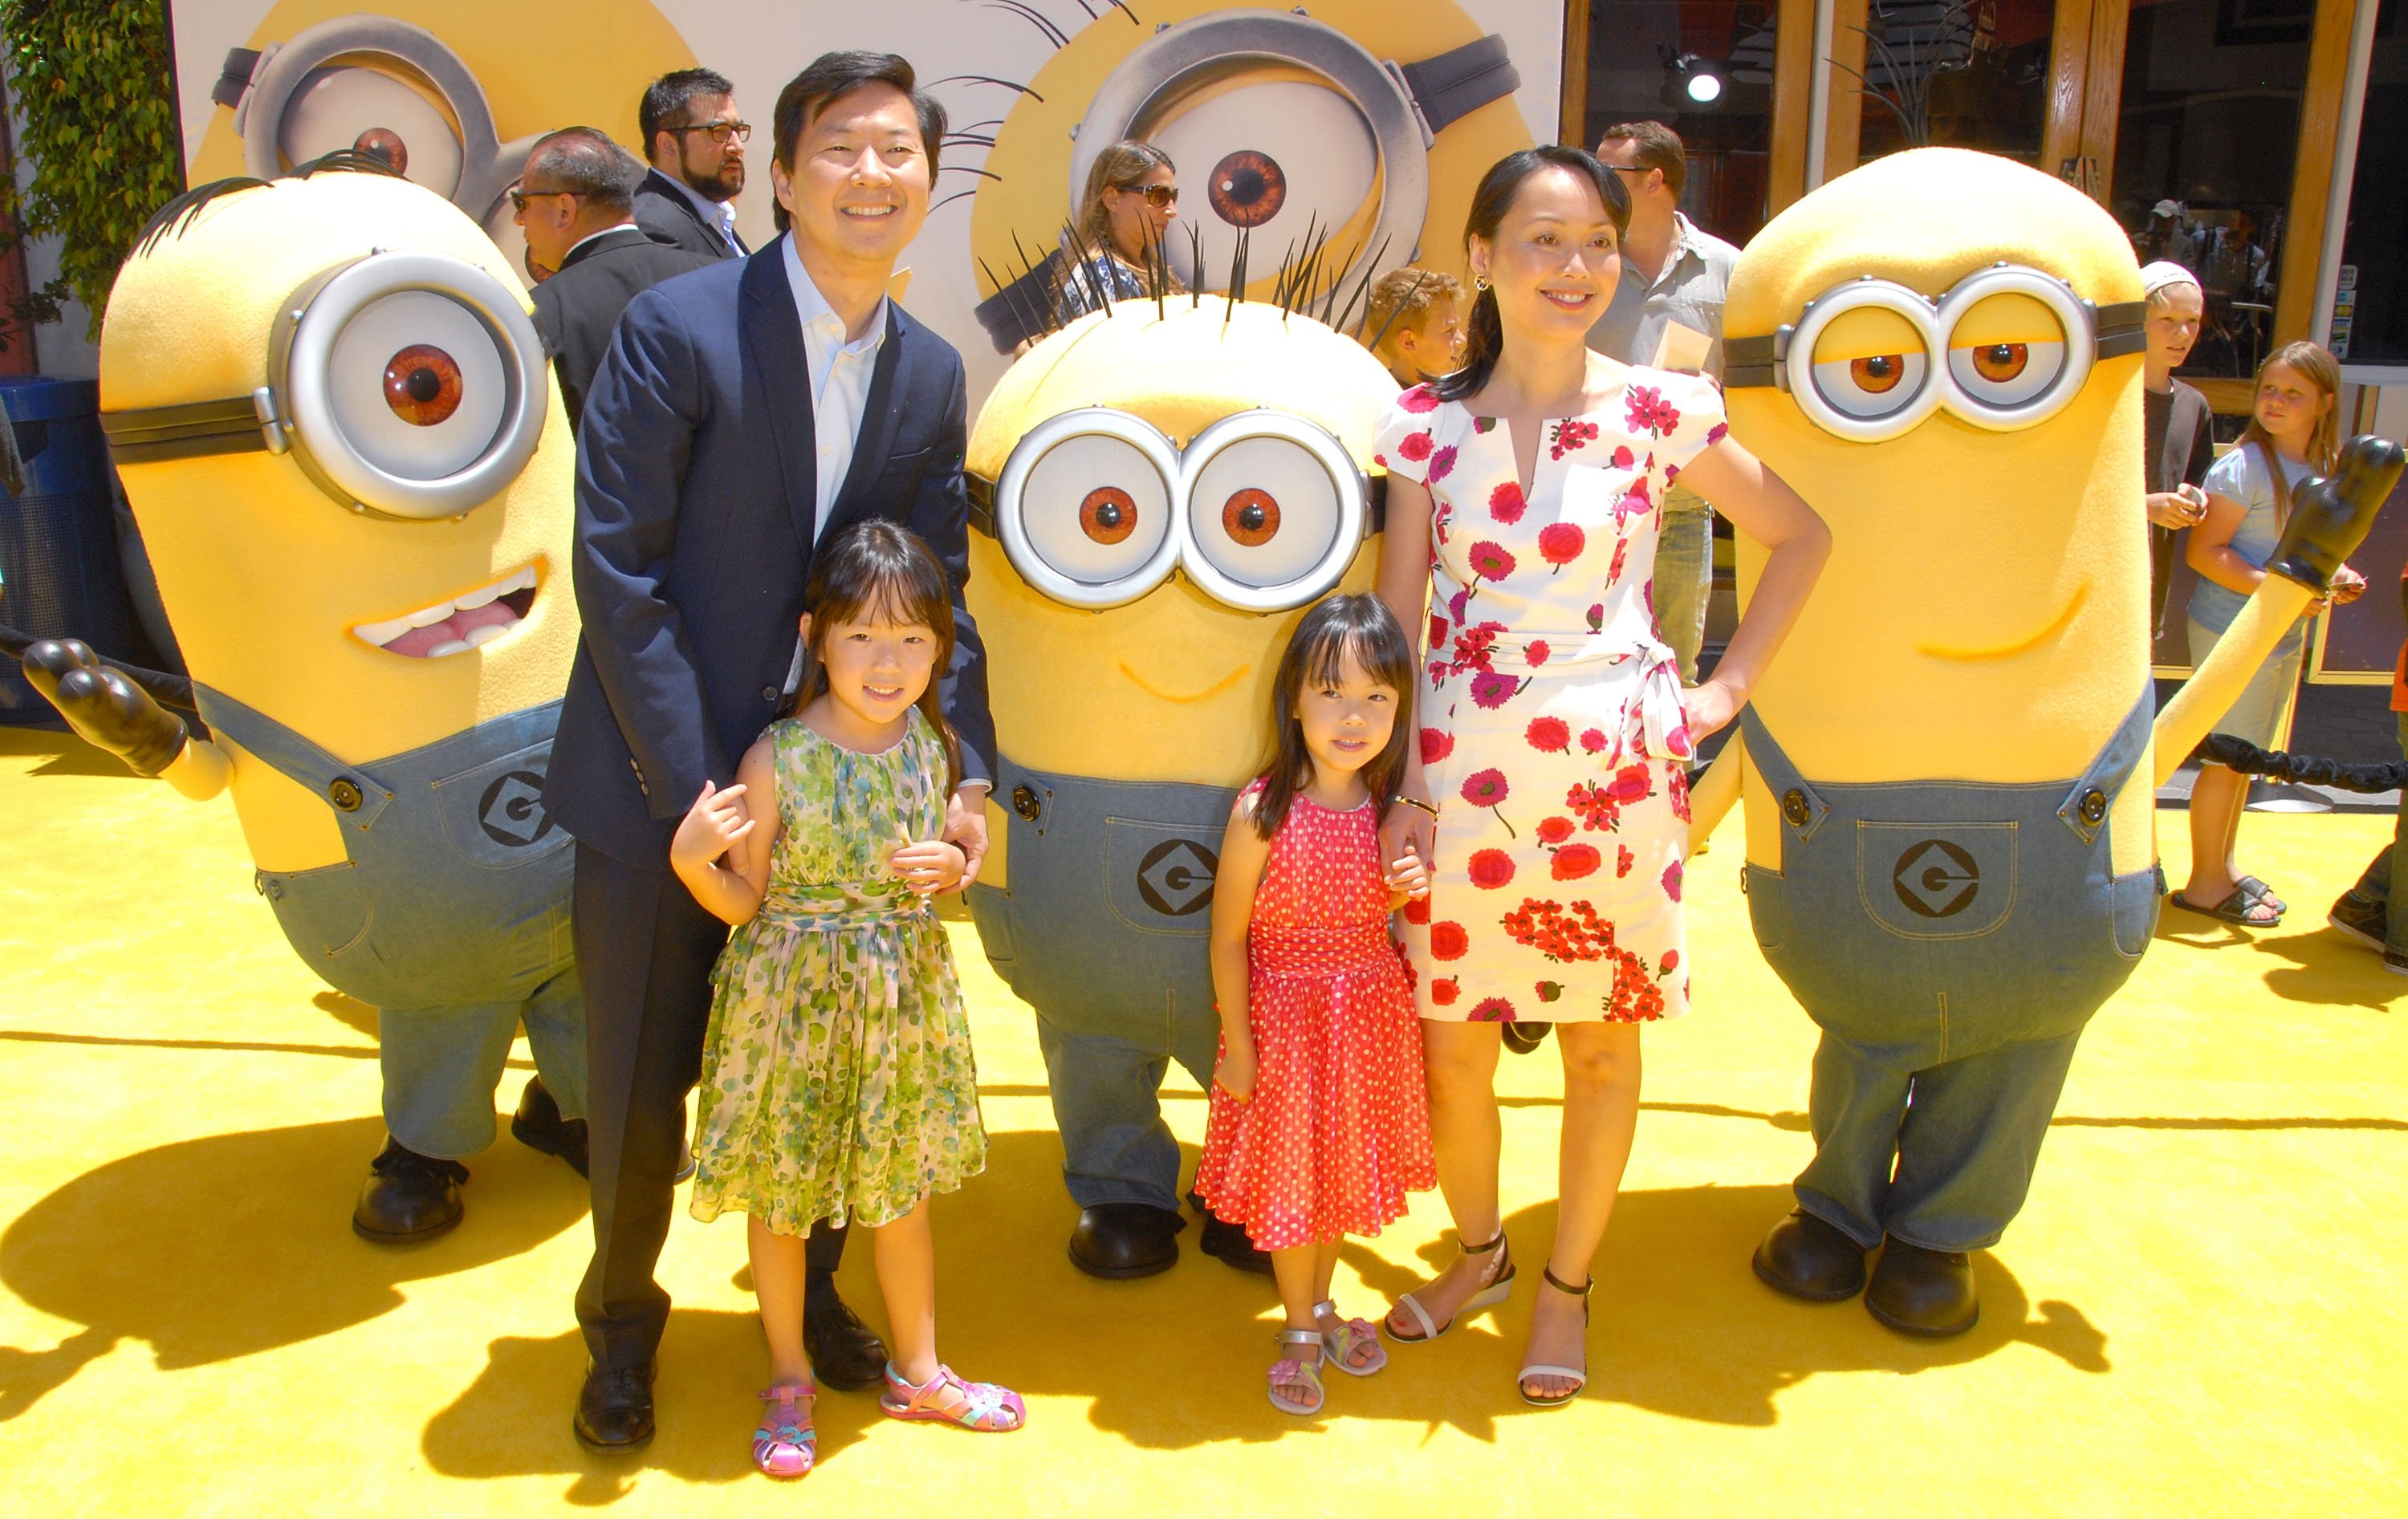 Ken Jeong, Tran Jeong, Zooey Jeong, and Alexa Jeong during the Los Angeles premiere of 'Despicable Me 2" held at Universal CityWalk on June 22, 2013 in Universal City, California. | Source: Getty Images